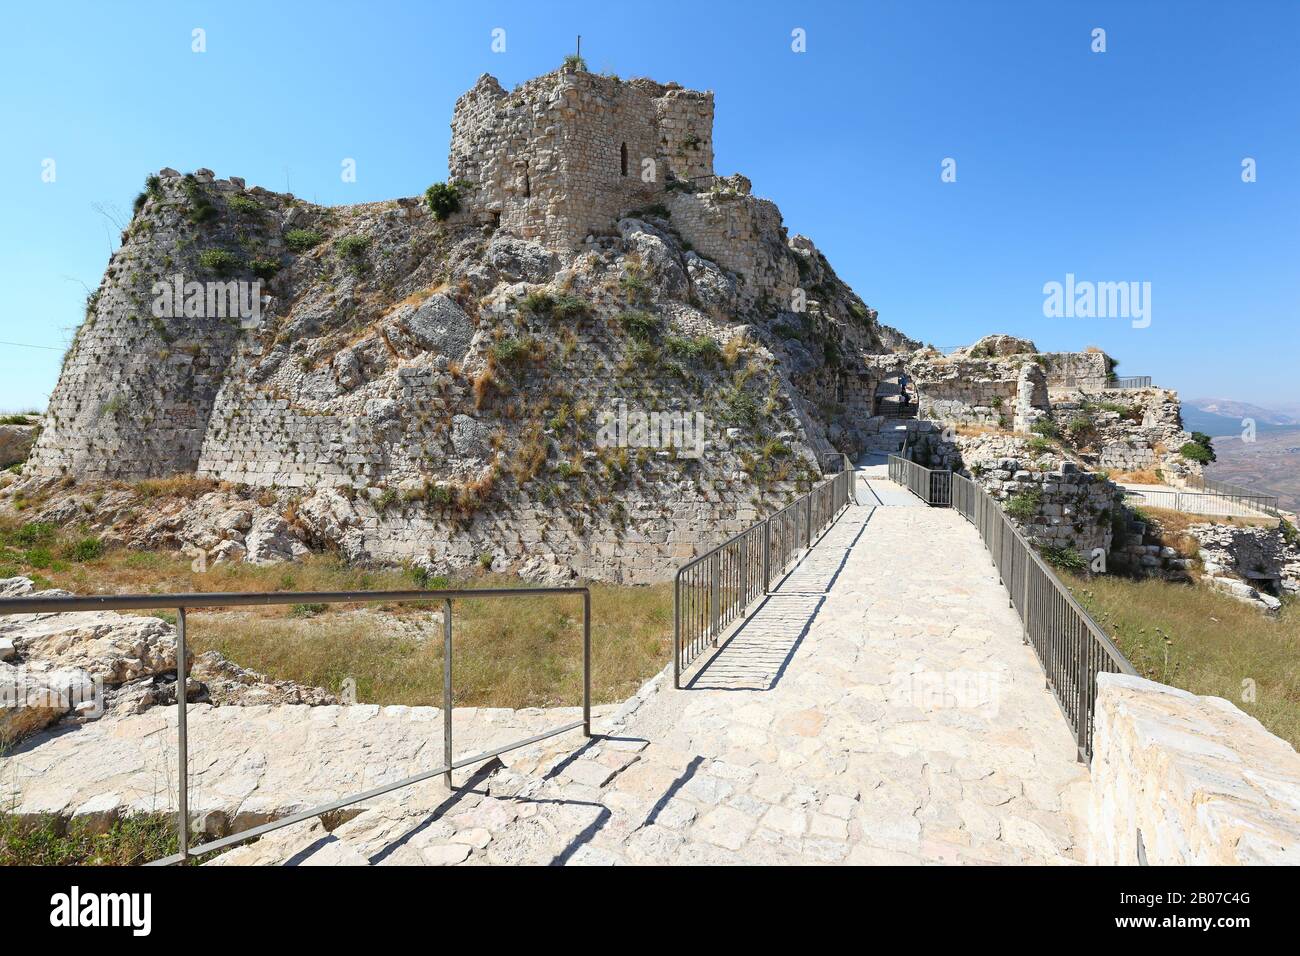 Lebanon: Remains of Beaufort Crusader Fortress in South Lebanon Stock Photo